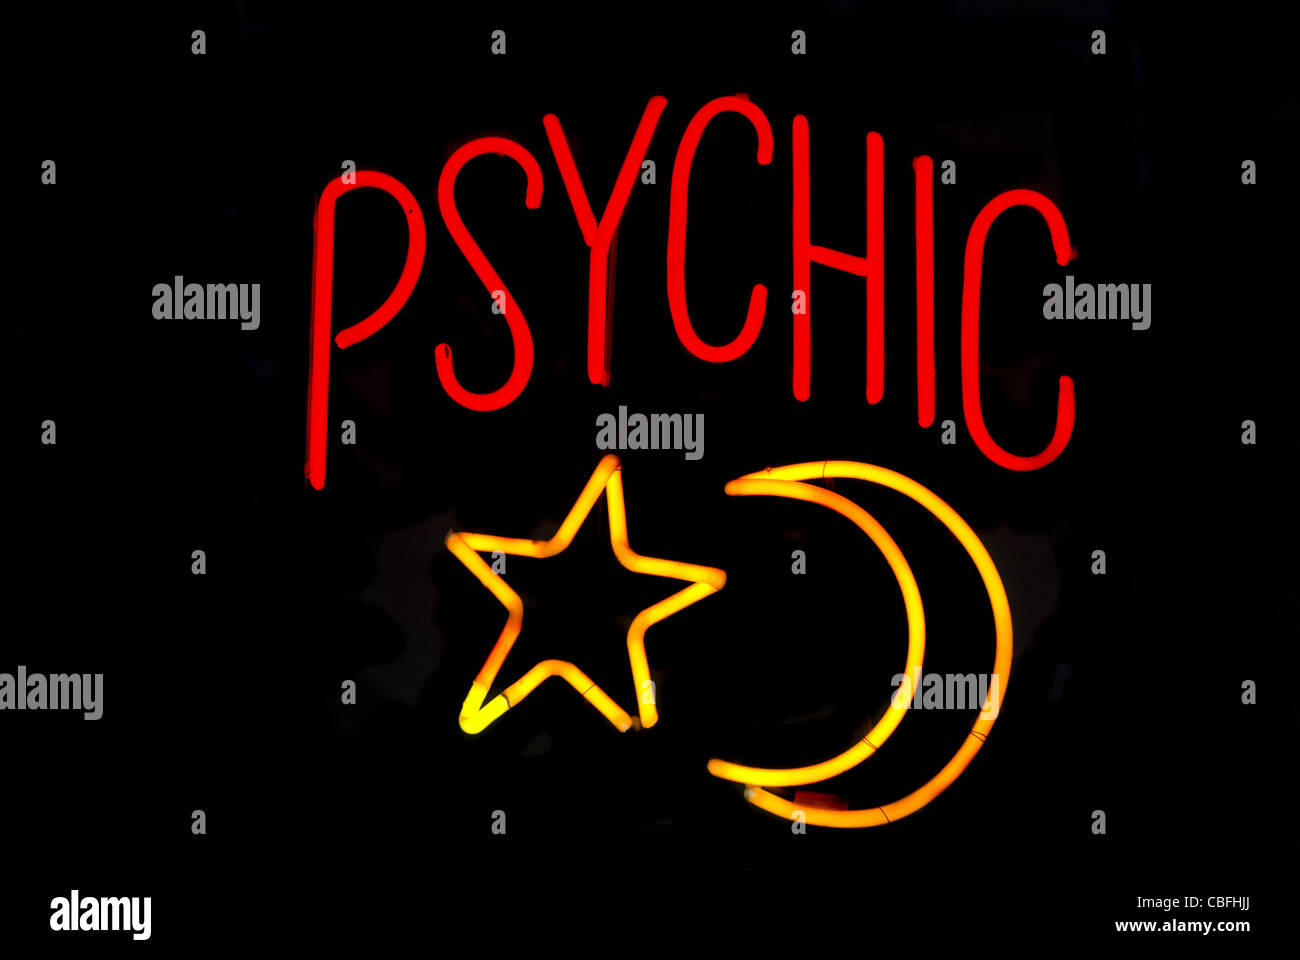 Psychic neon sign with moon and star Stock Photo